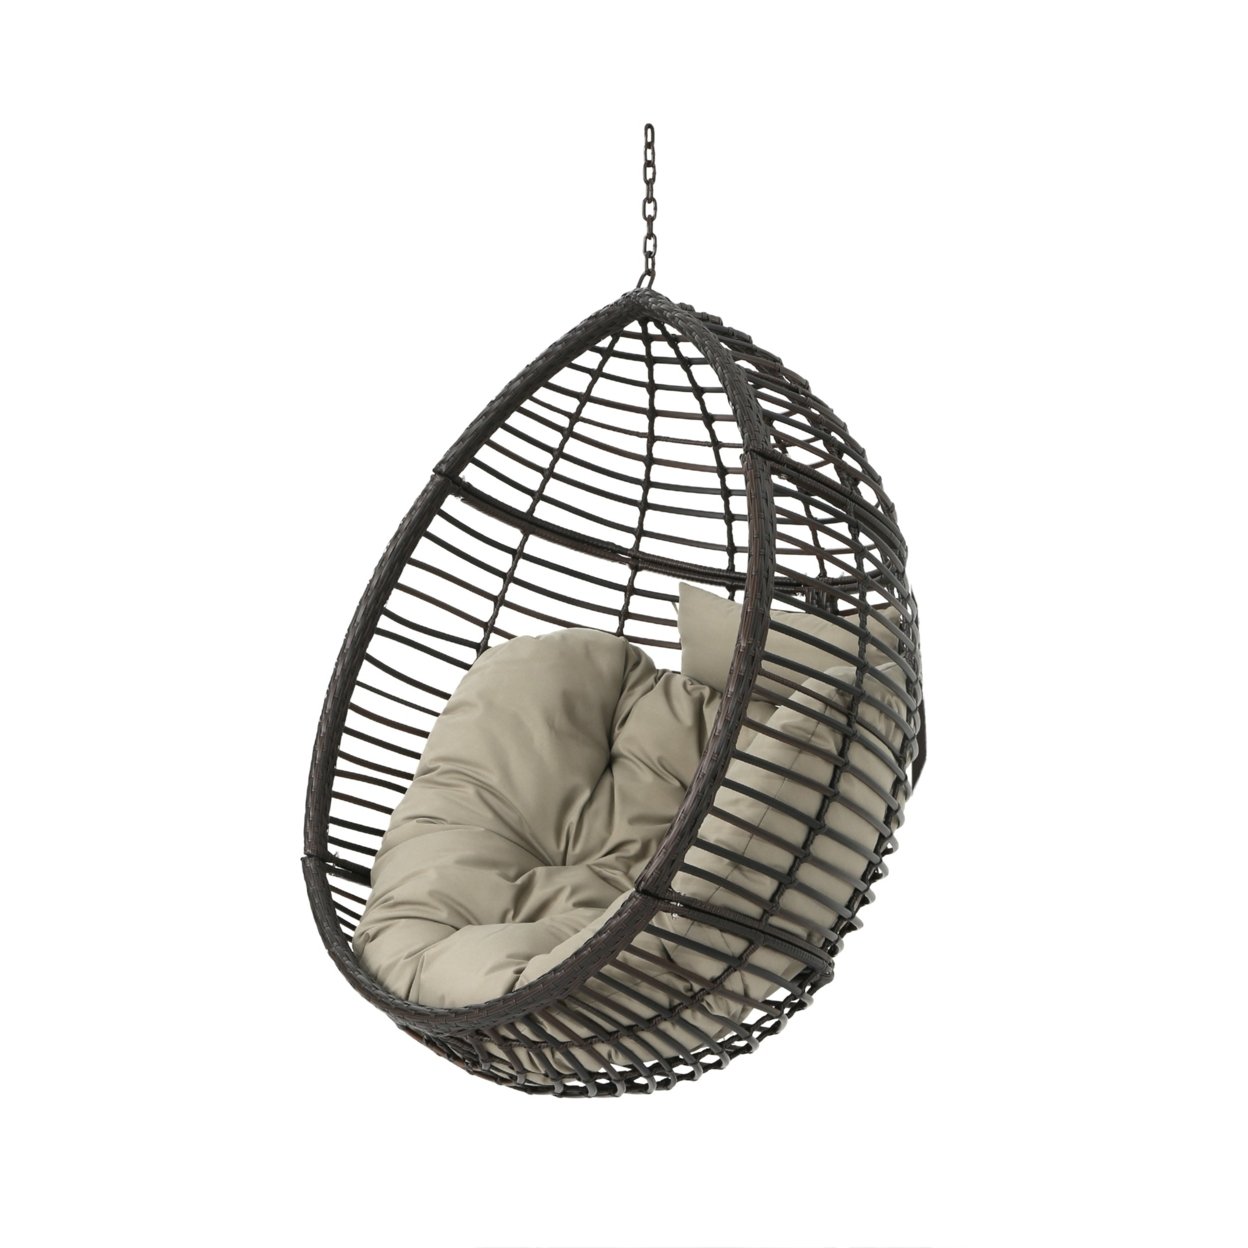 Leasa Outdoor Hanging Basket Chair (Stand Not Included) - Multi-brown/khaki